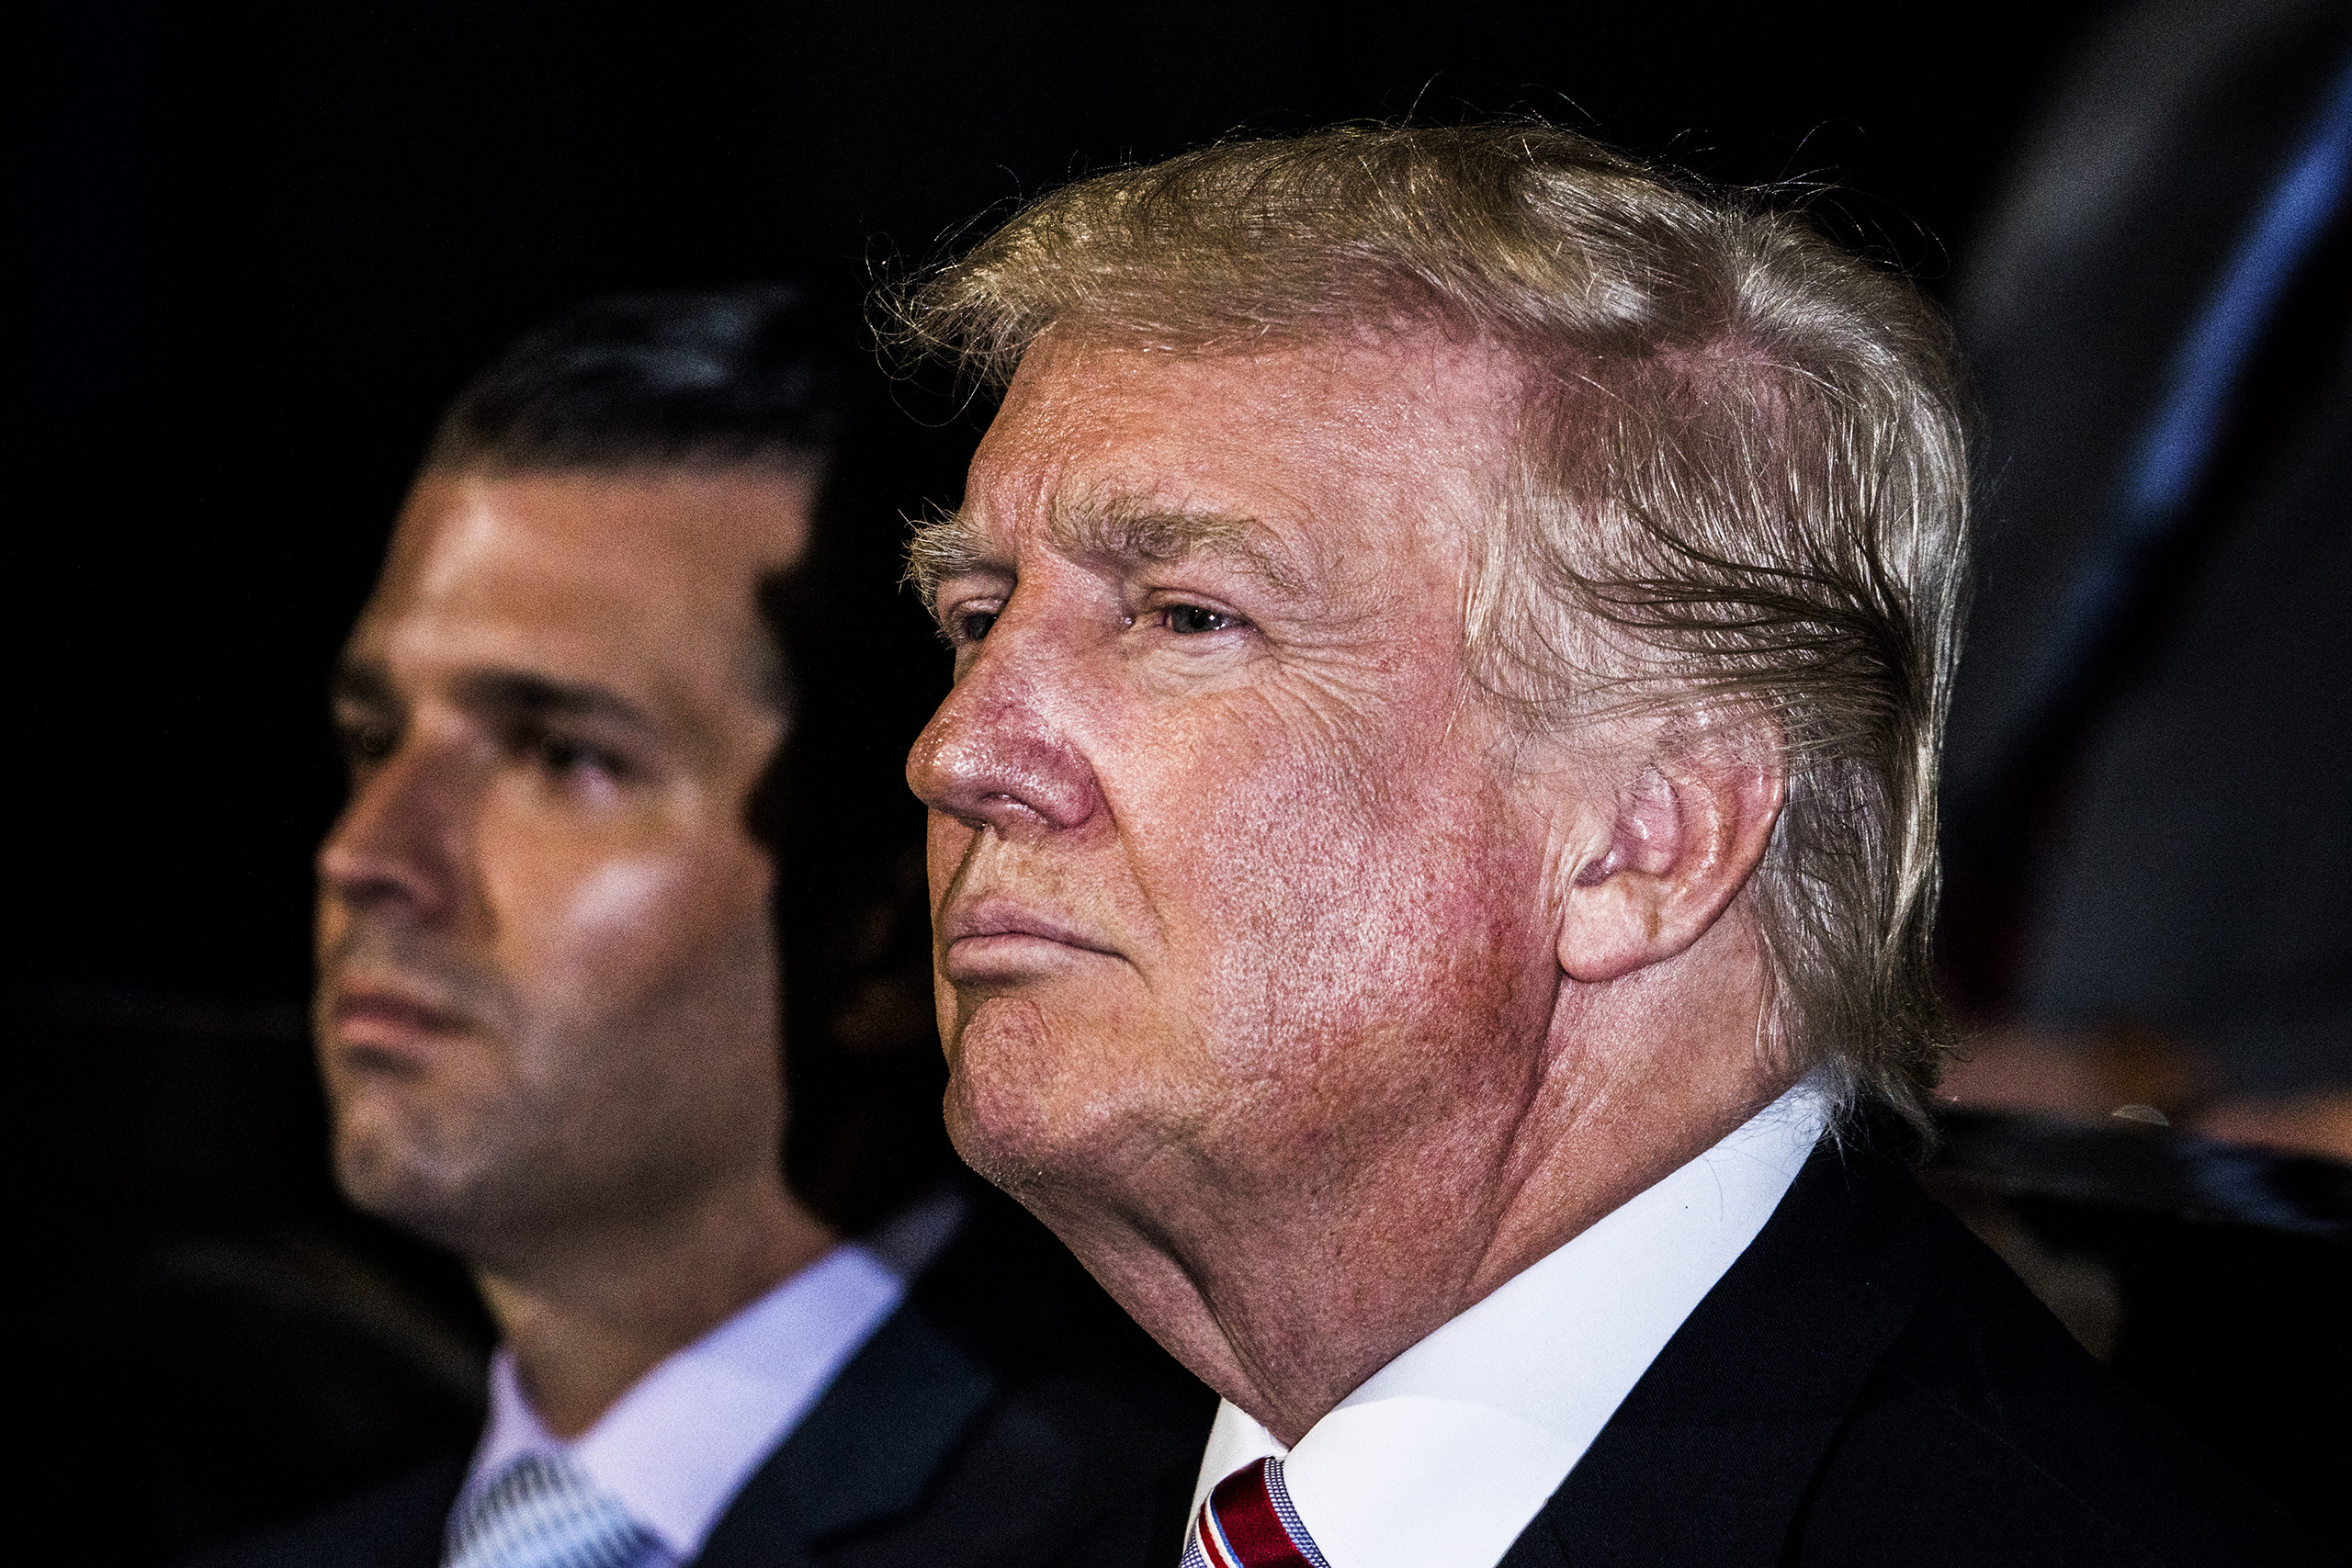 Republican presidential candidate Donald Trump and Donald Trump Jr listen to Eric Trump on July 20, 2016, at the Quicken Loans Arena in Cleveland, Ohio.